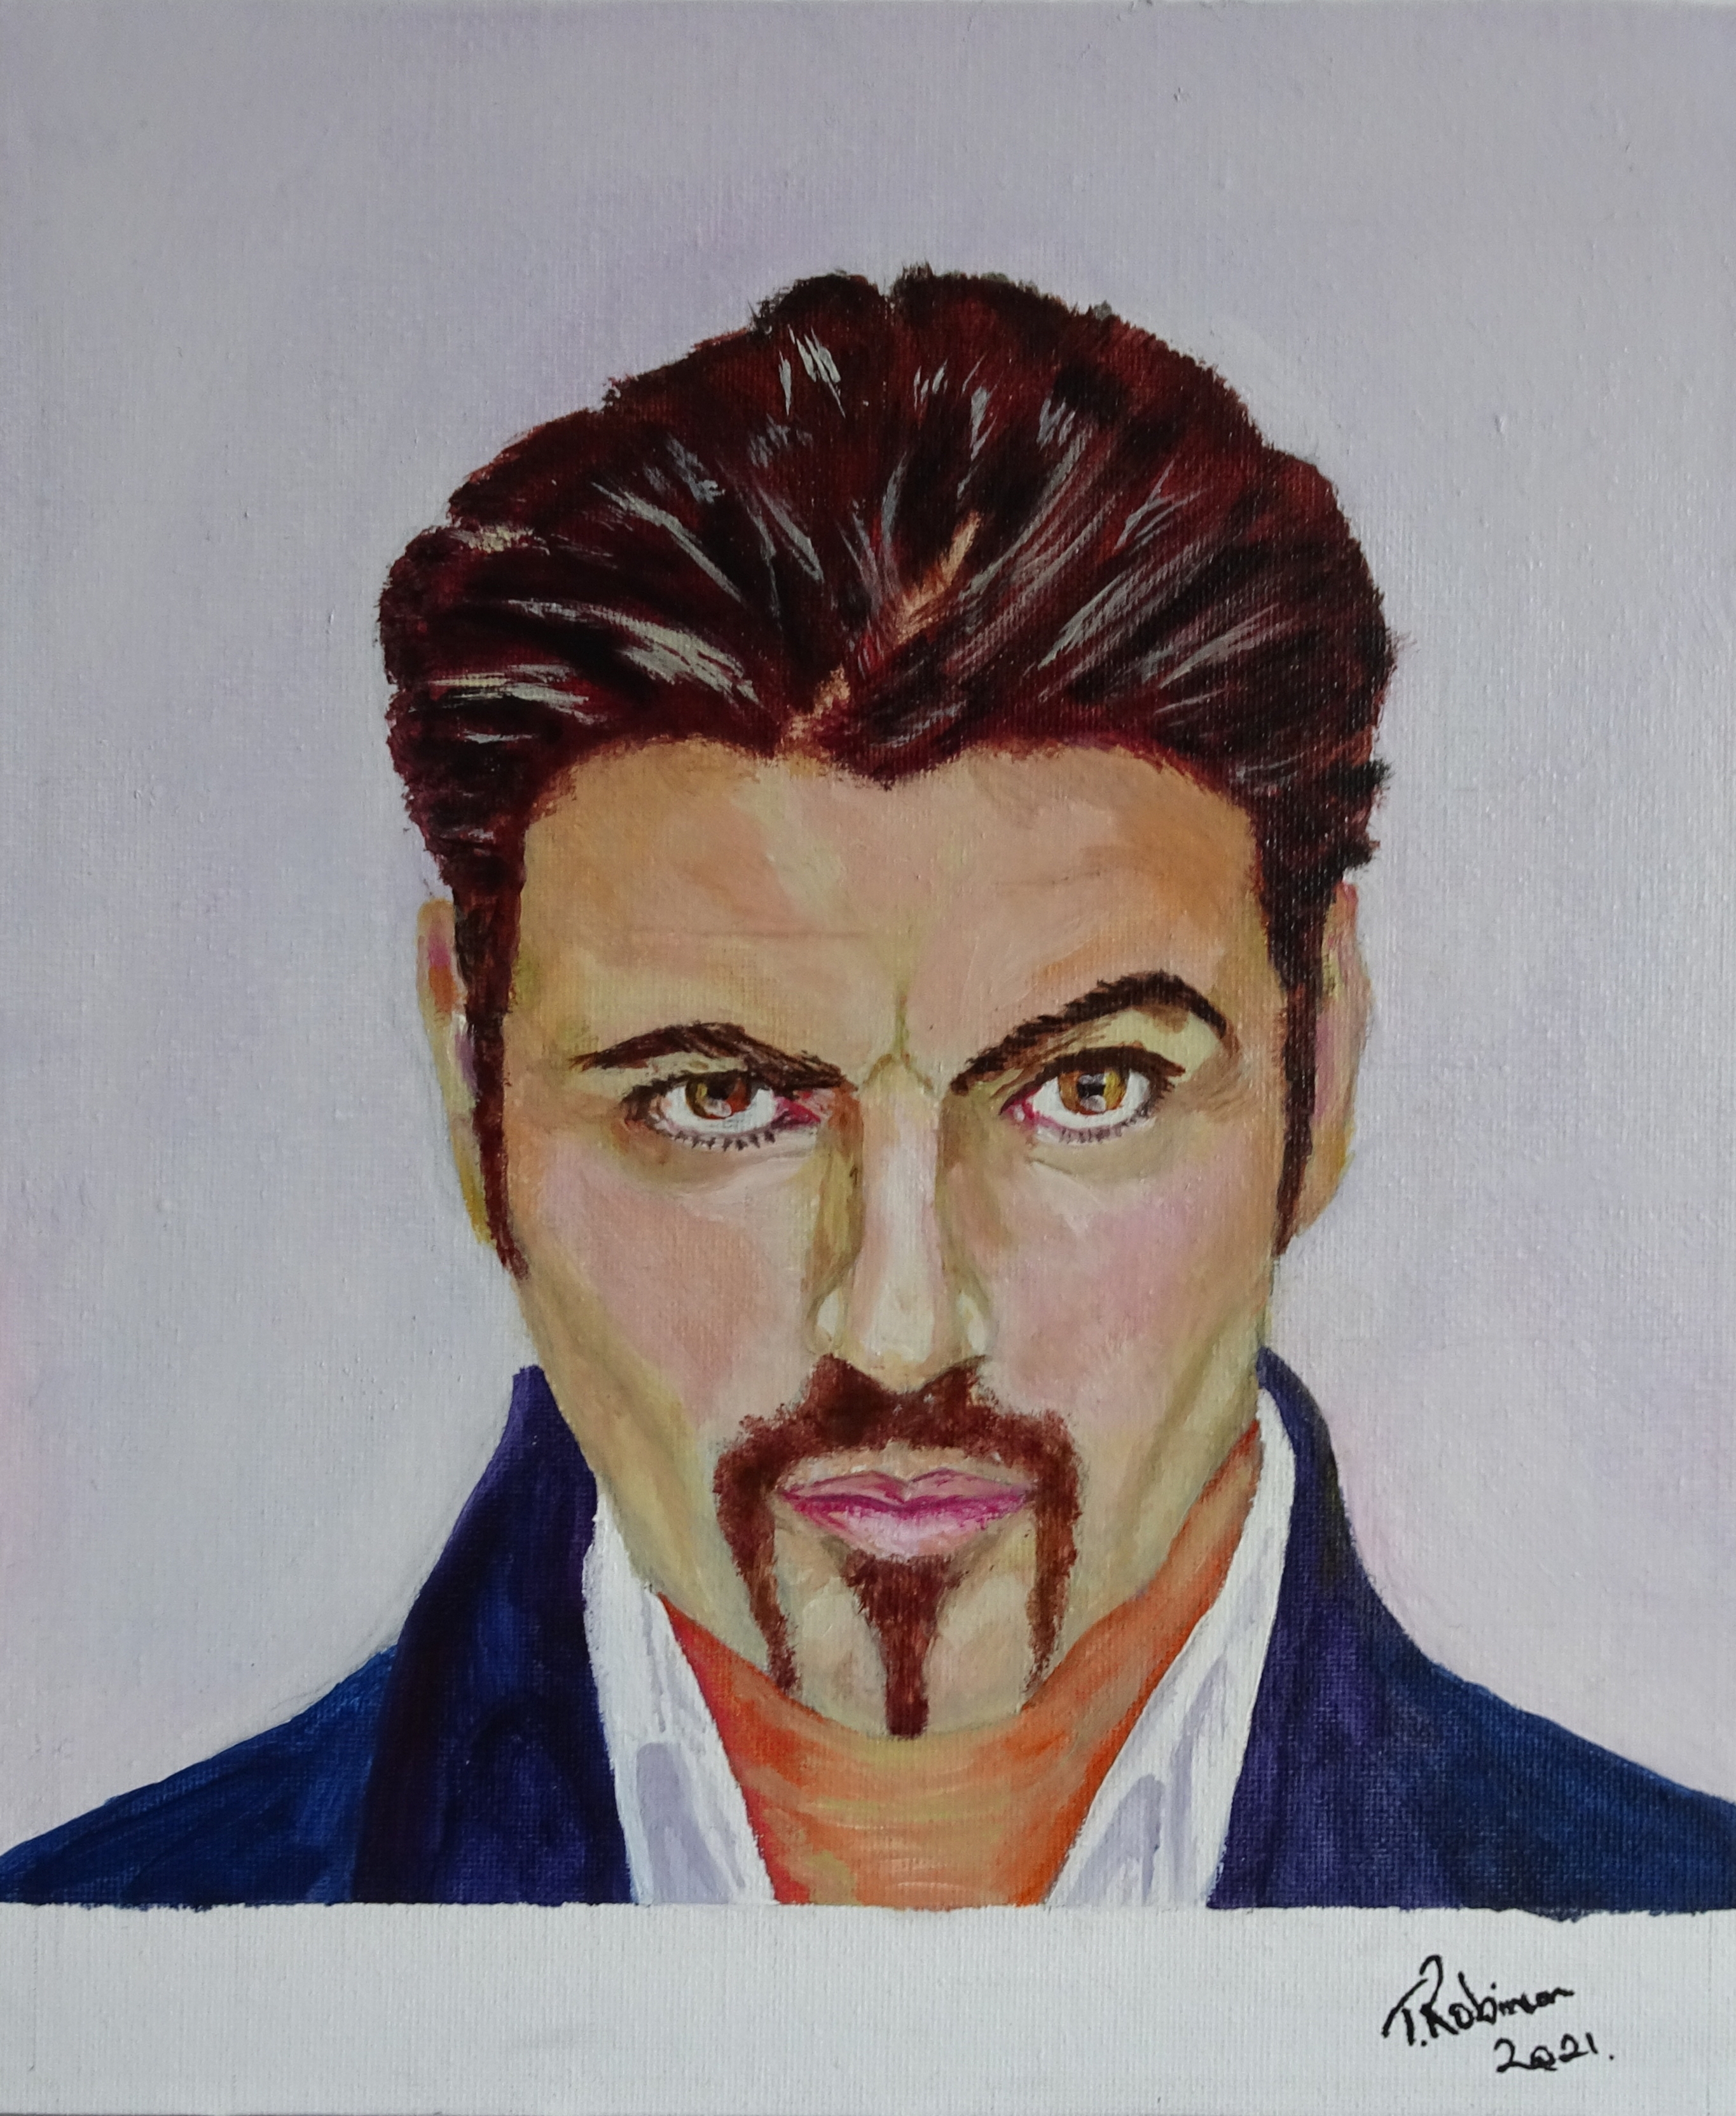 The late Great George Michael